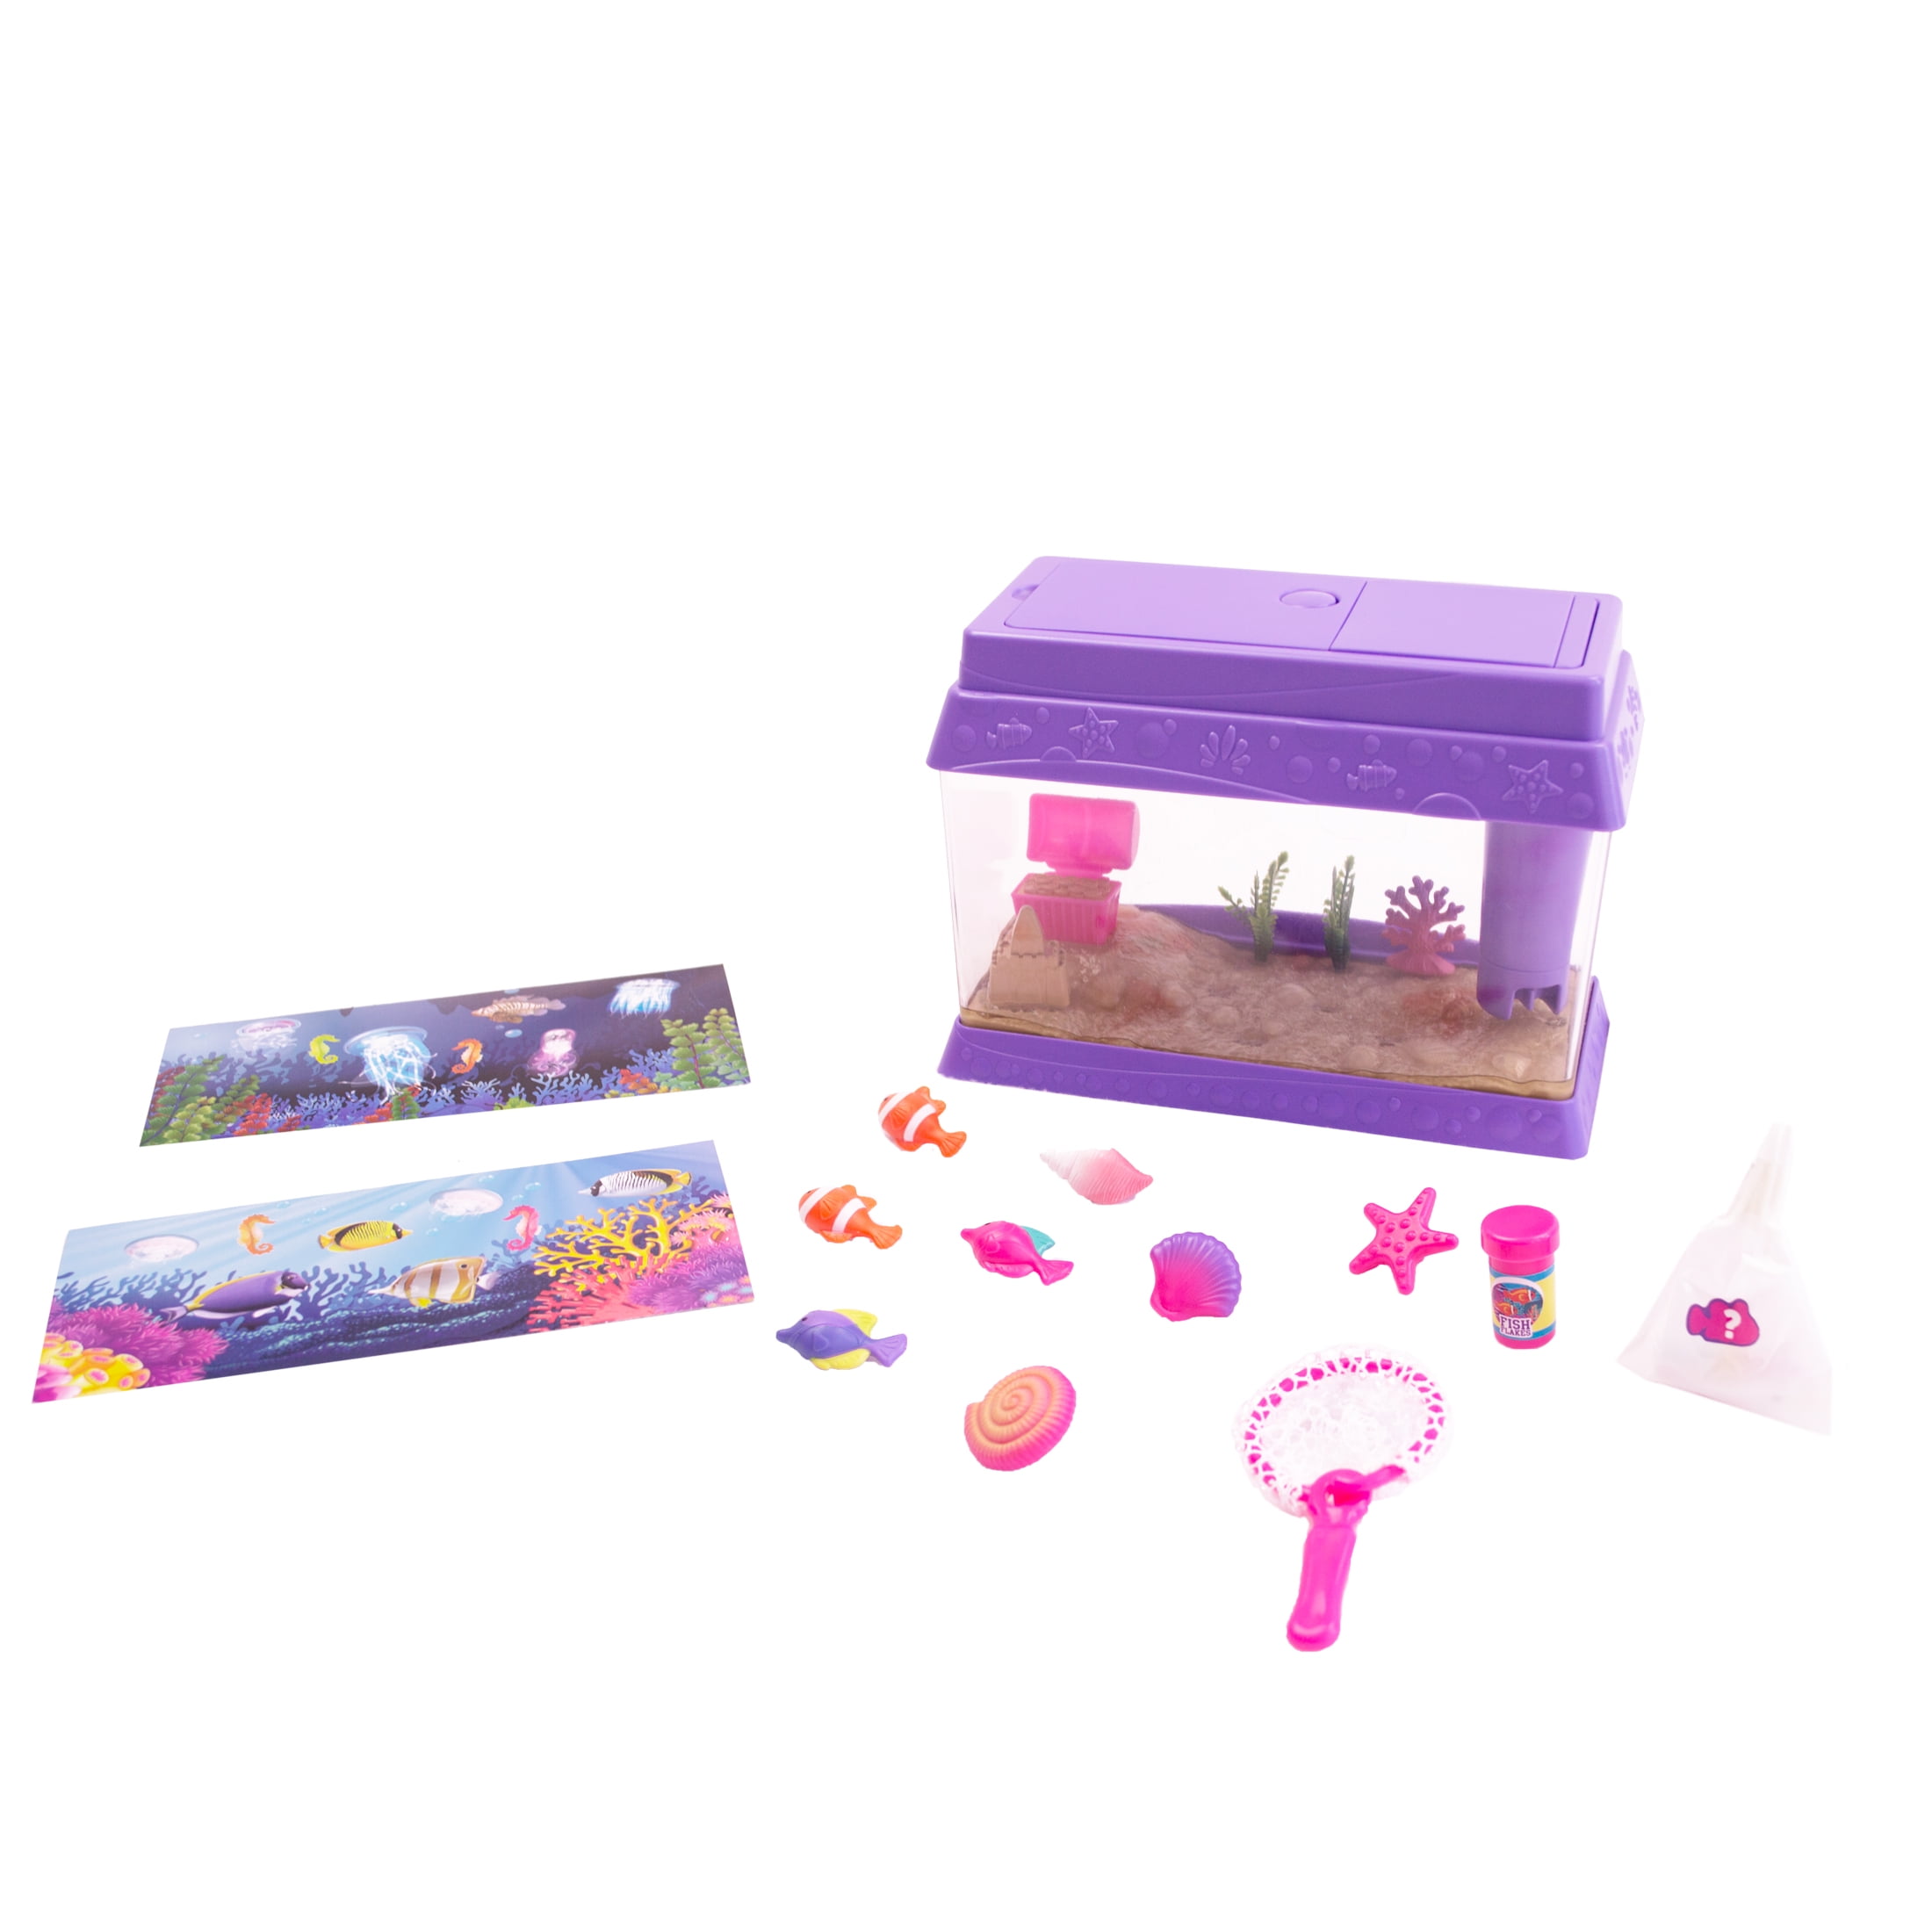 Details about   New Fish tank Accessories Fit For 18" American Girl dolls Toys gift #K12 